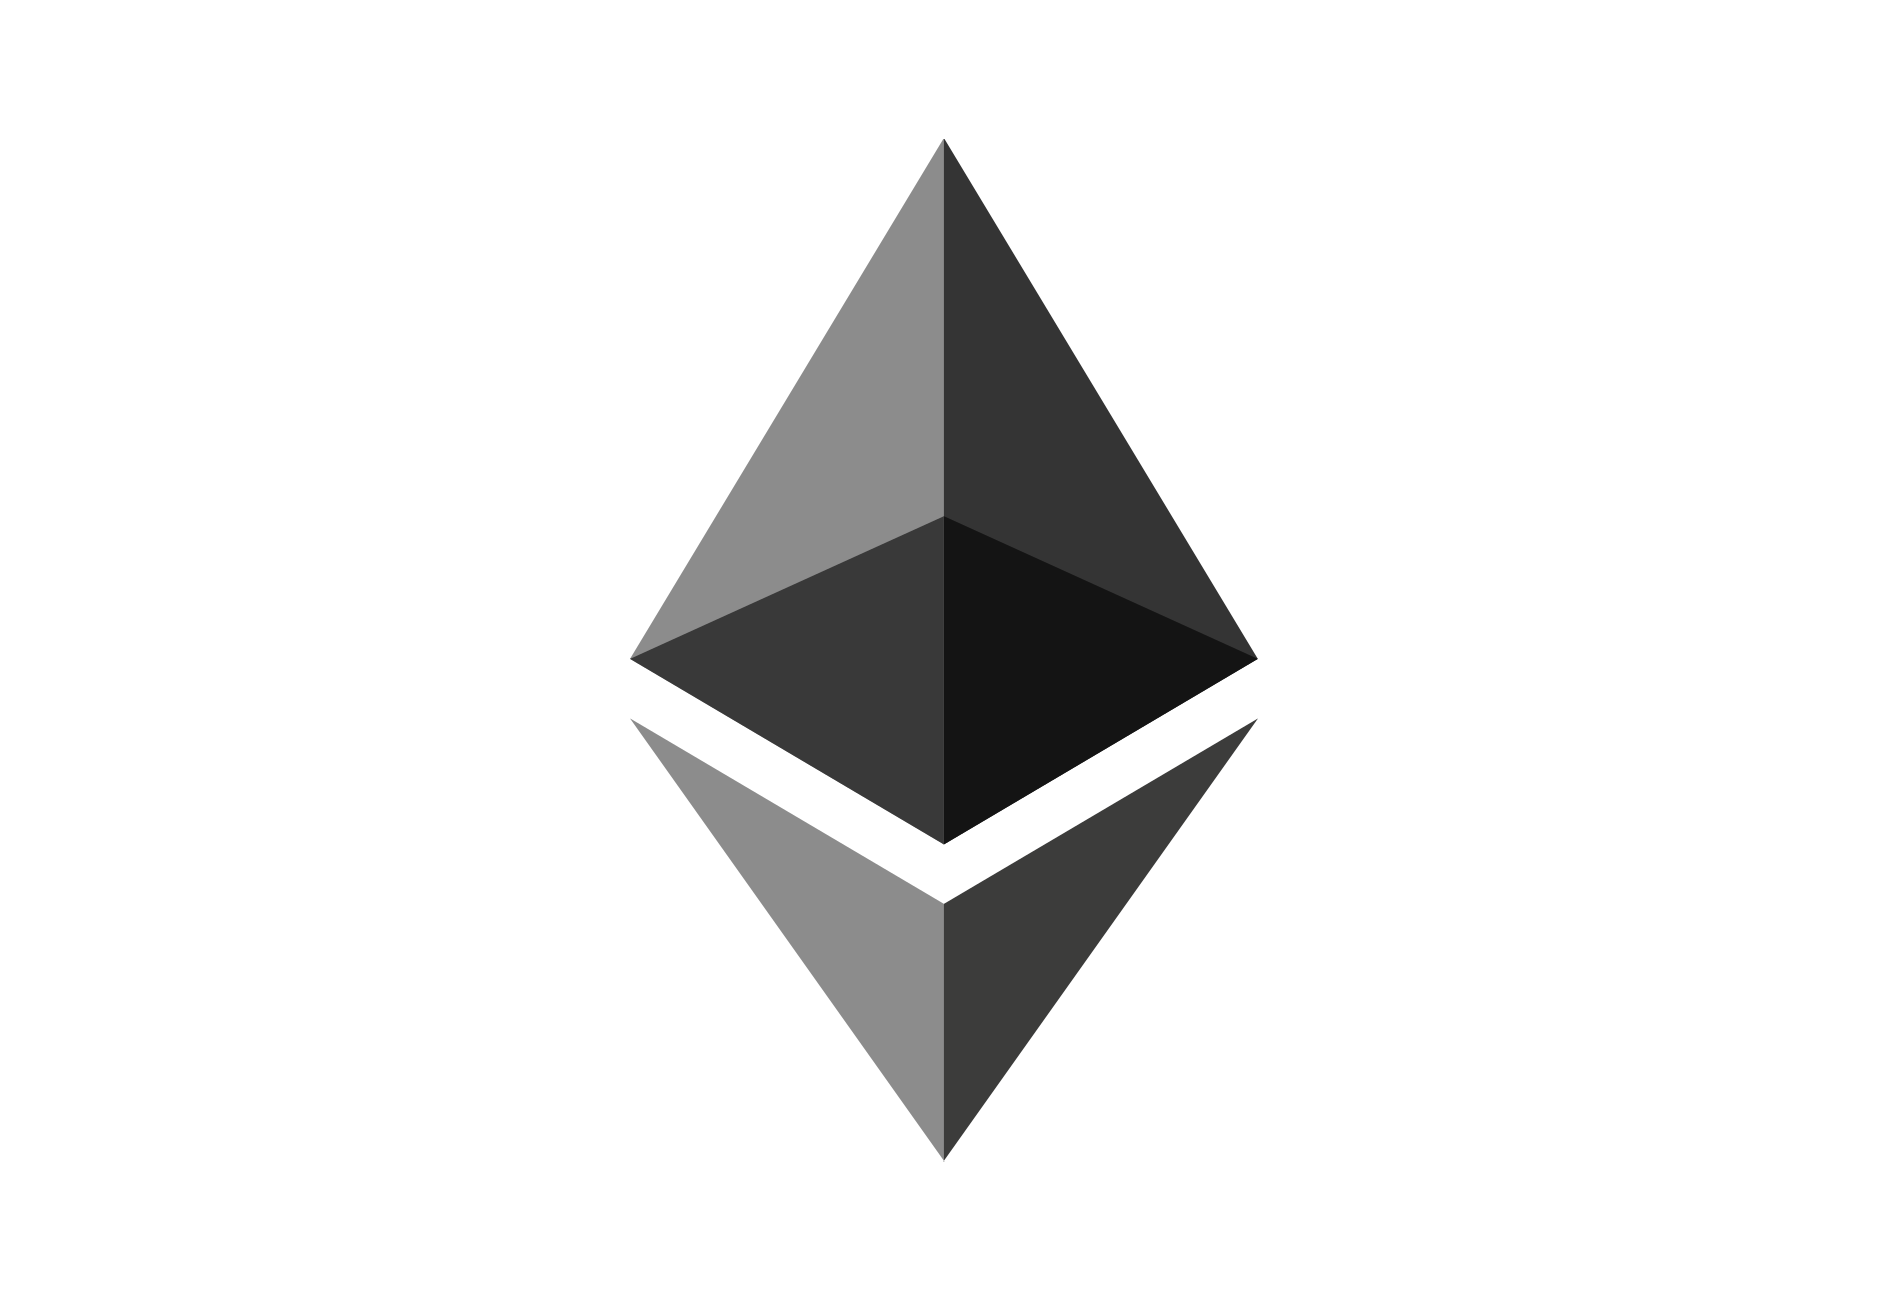 Ethereum pages